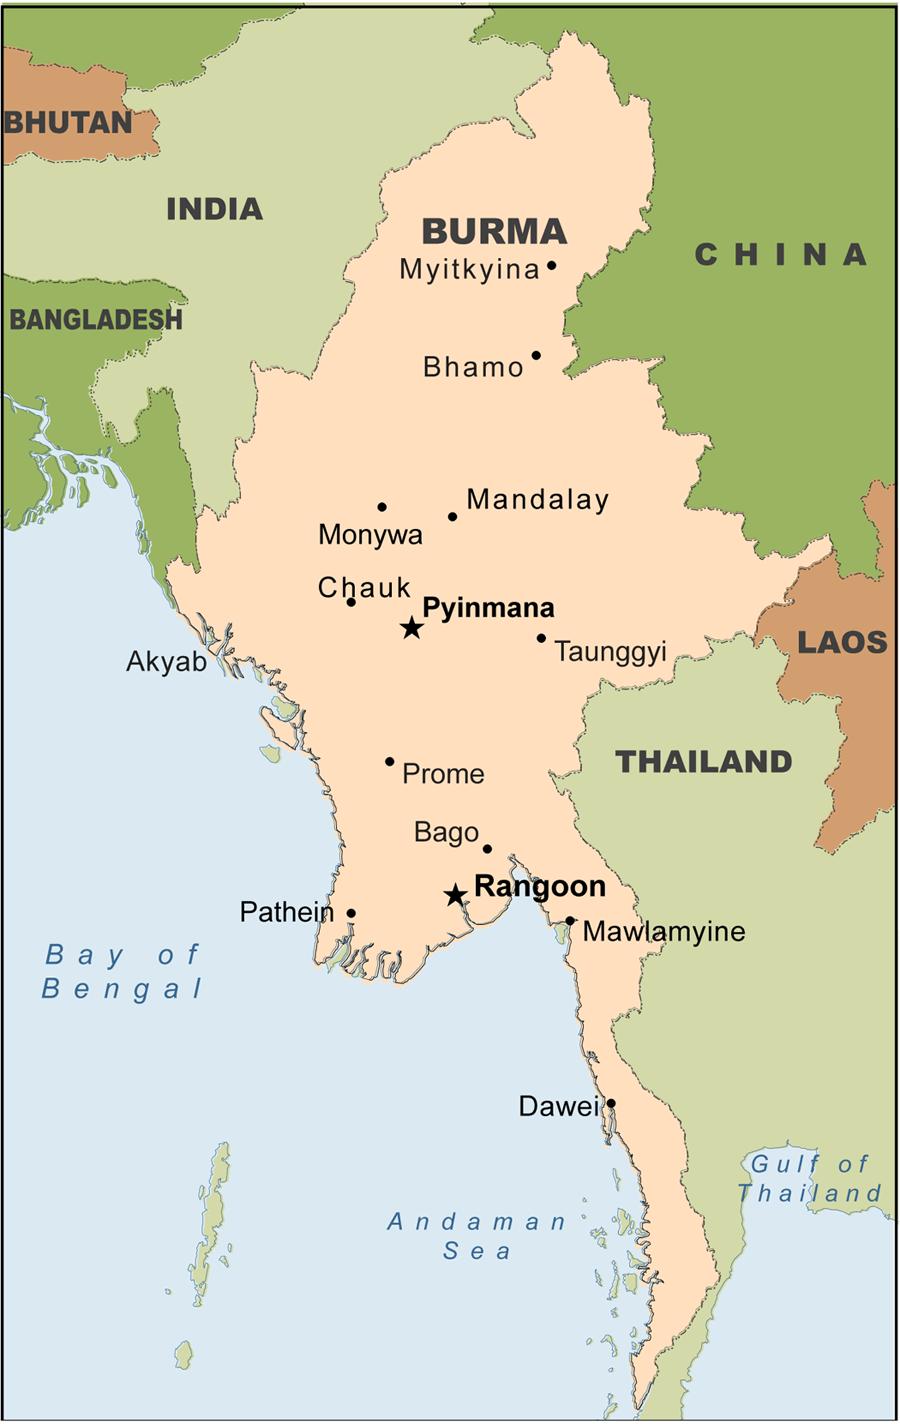 Figure 2. Map of Burma Source: Map Resources.